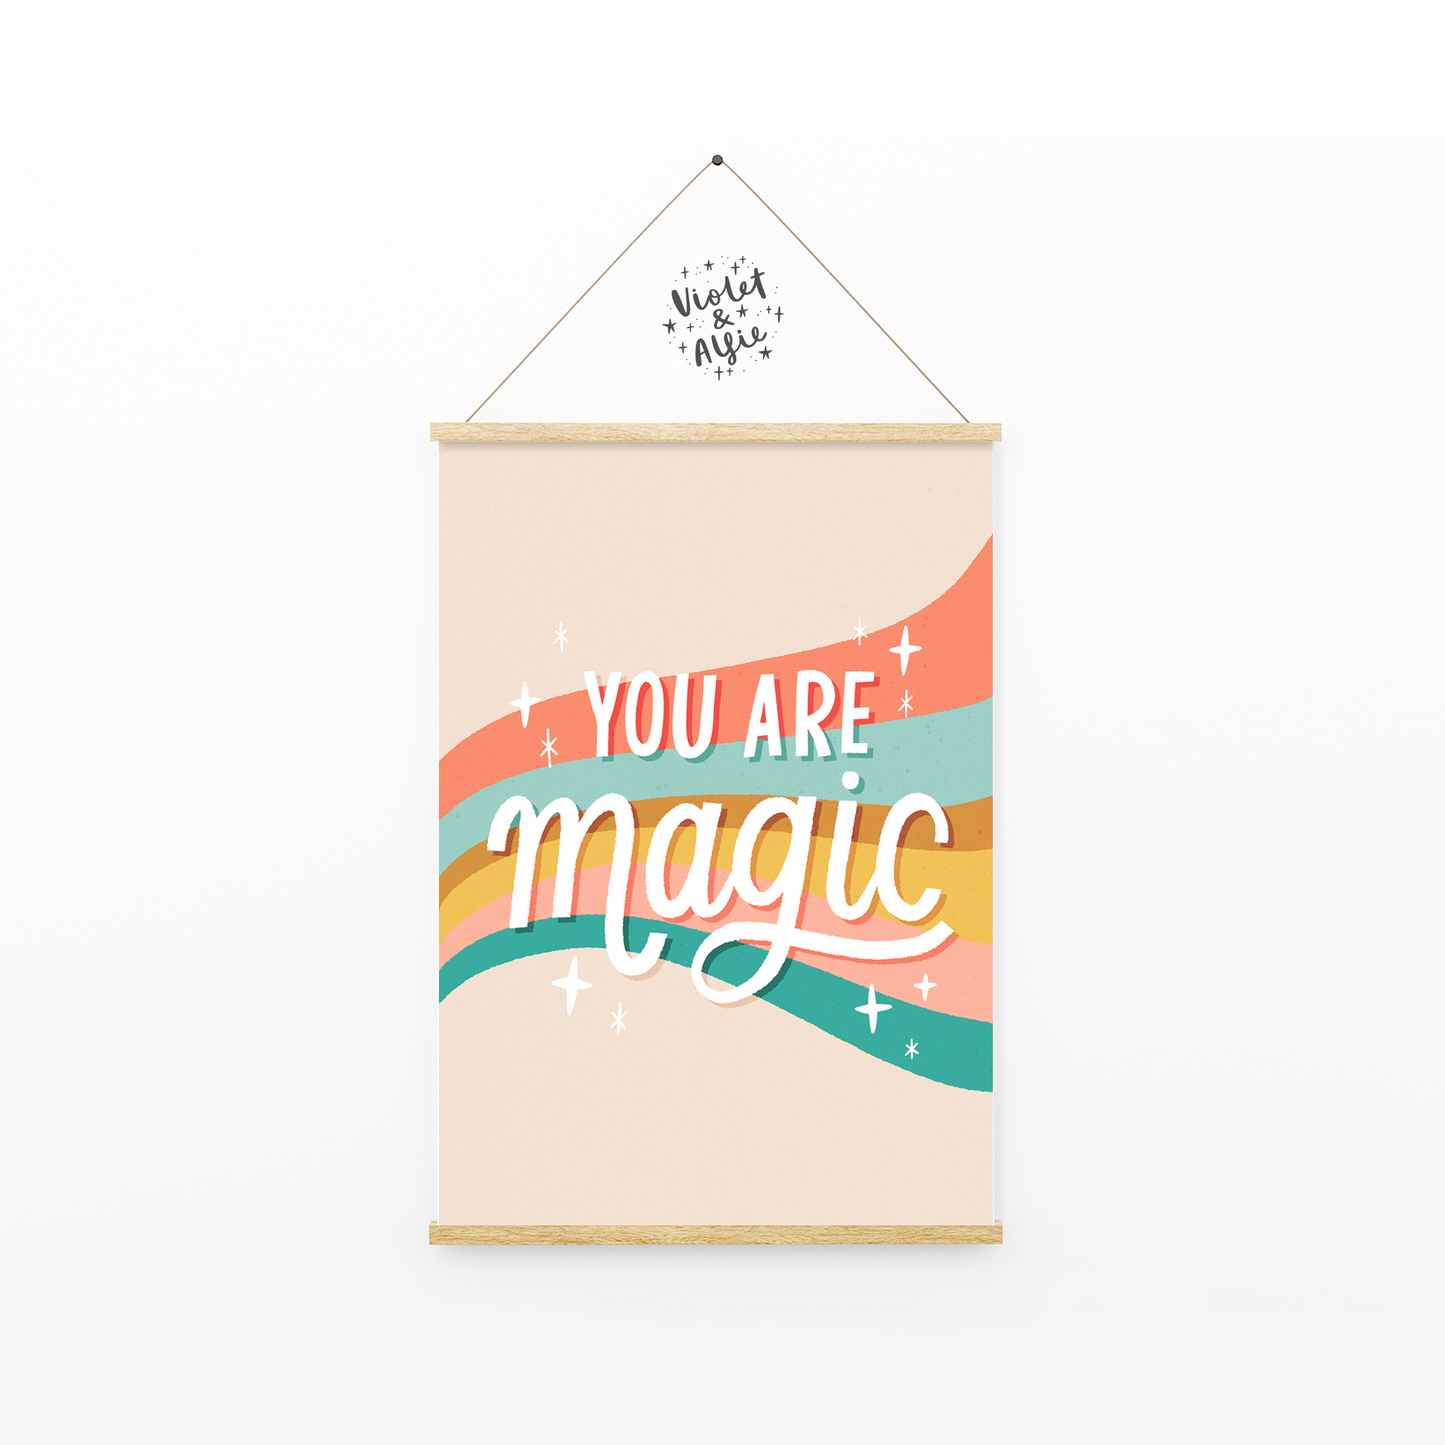 You Are Magic Print , Statement Art ,Eclectic Retro Colourful Decor, Inspirational poster, typographic wall art, peach green, purple mint, magic quote wall decor, eclectic gallery wall art